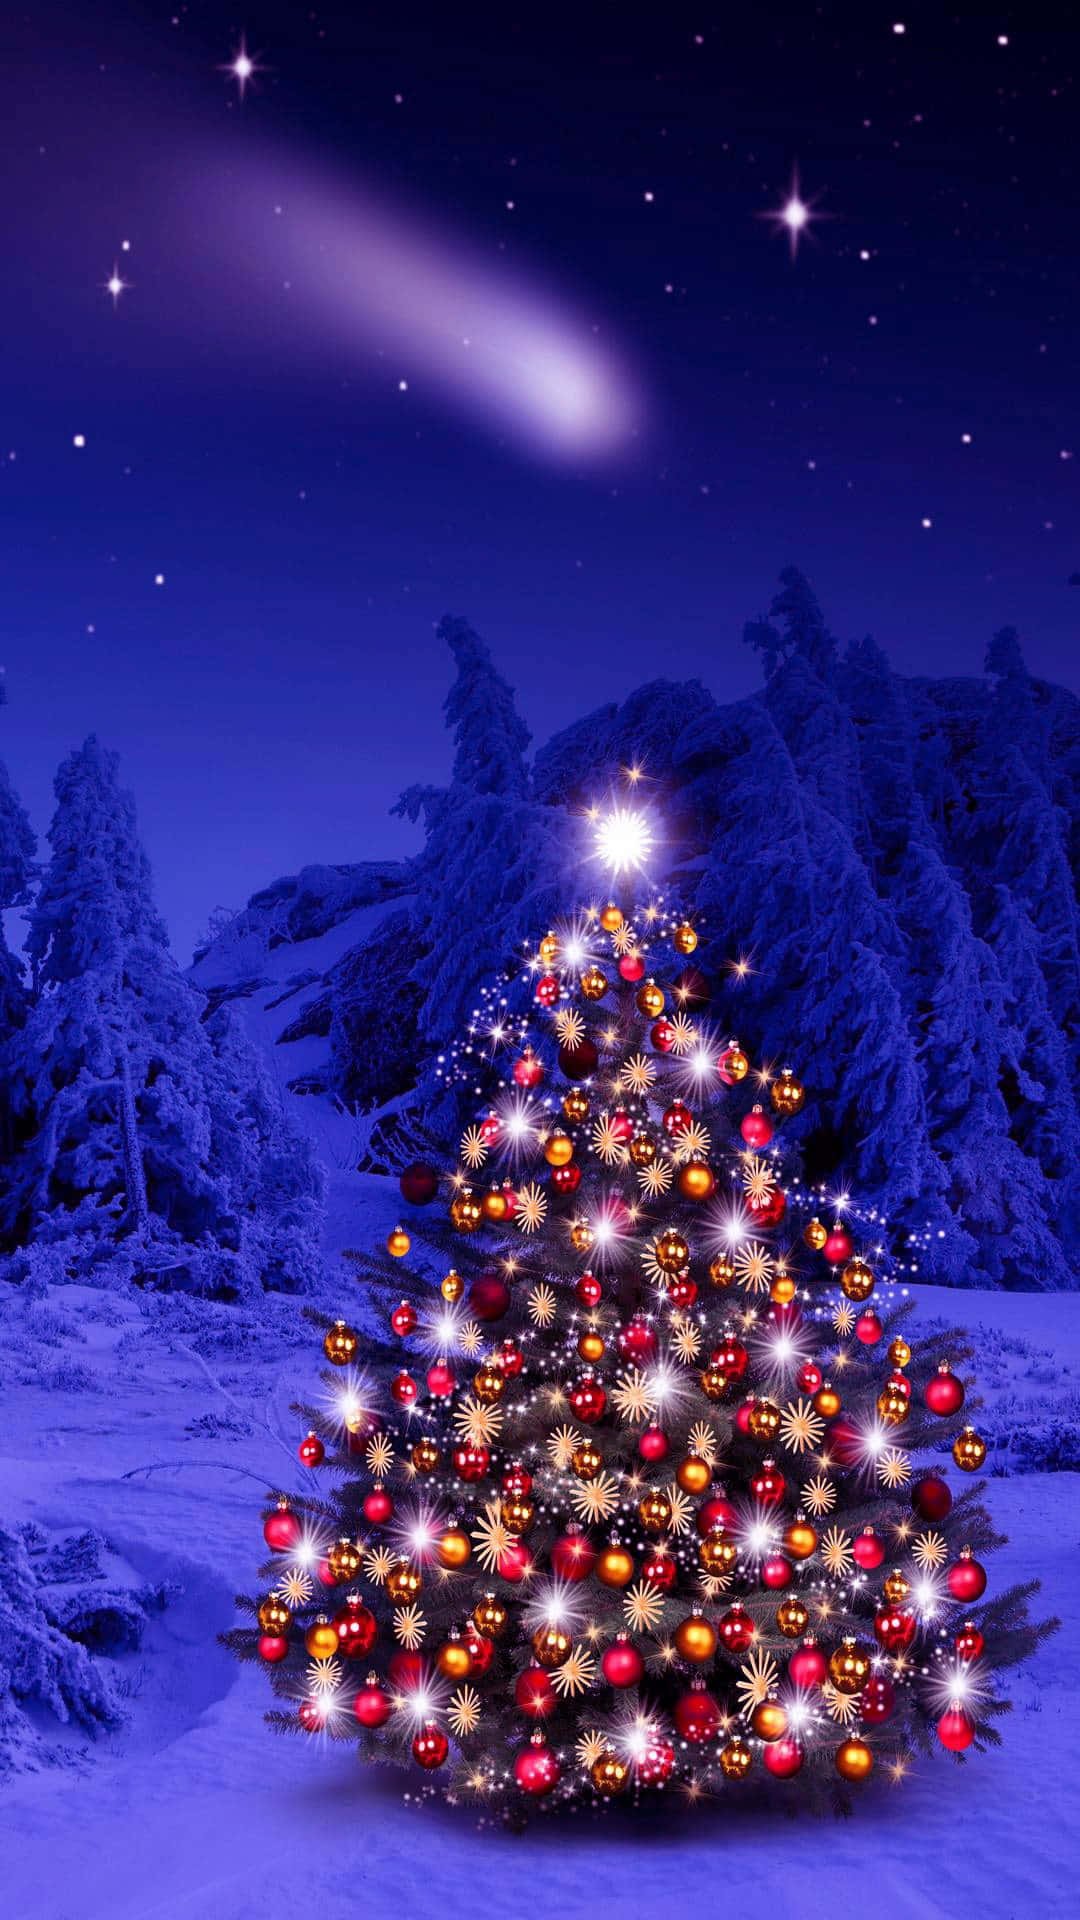 Download Deck the Halls with Adorable Lights Wallpaper | Wallpapers.com